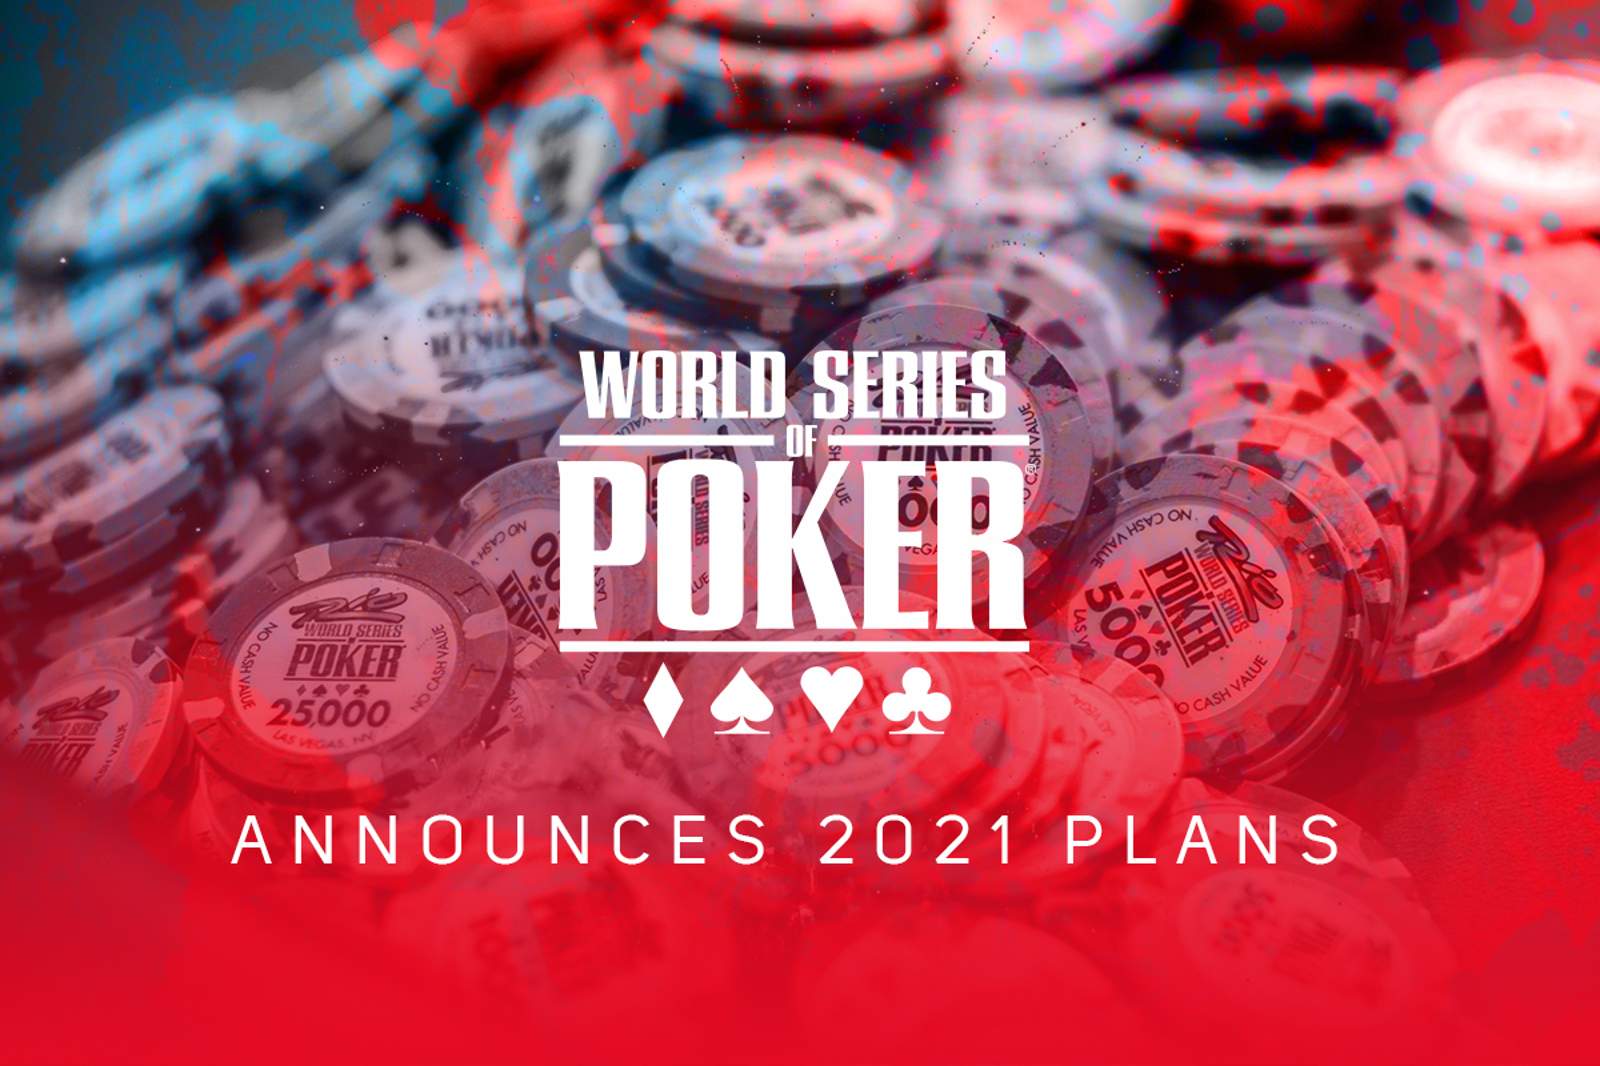 WSOP Announces 2021 Dates - Live, Online, and Europe Returning